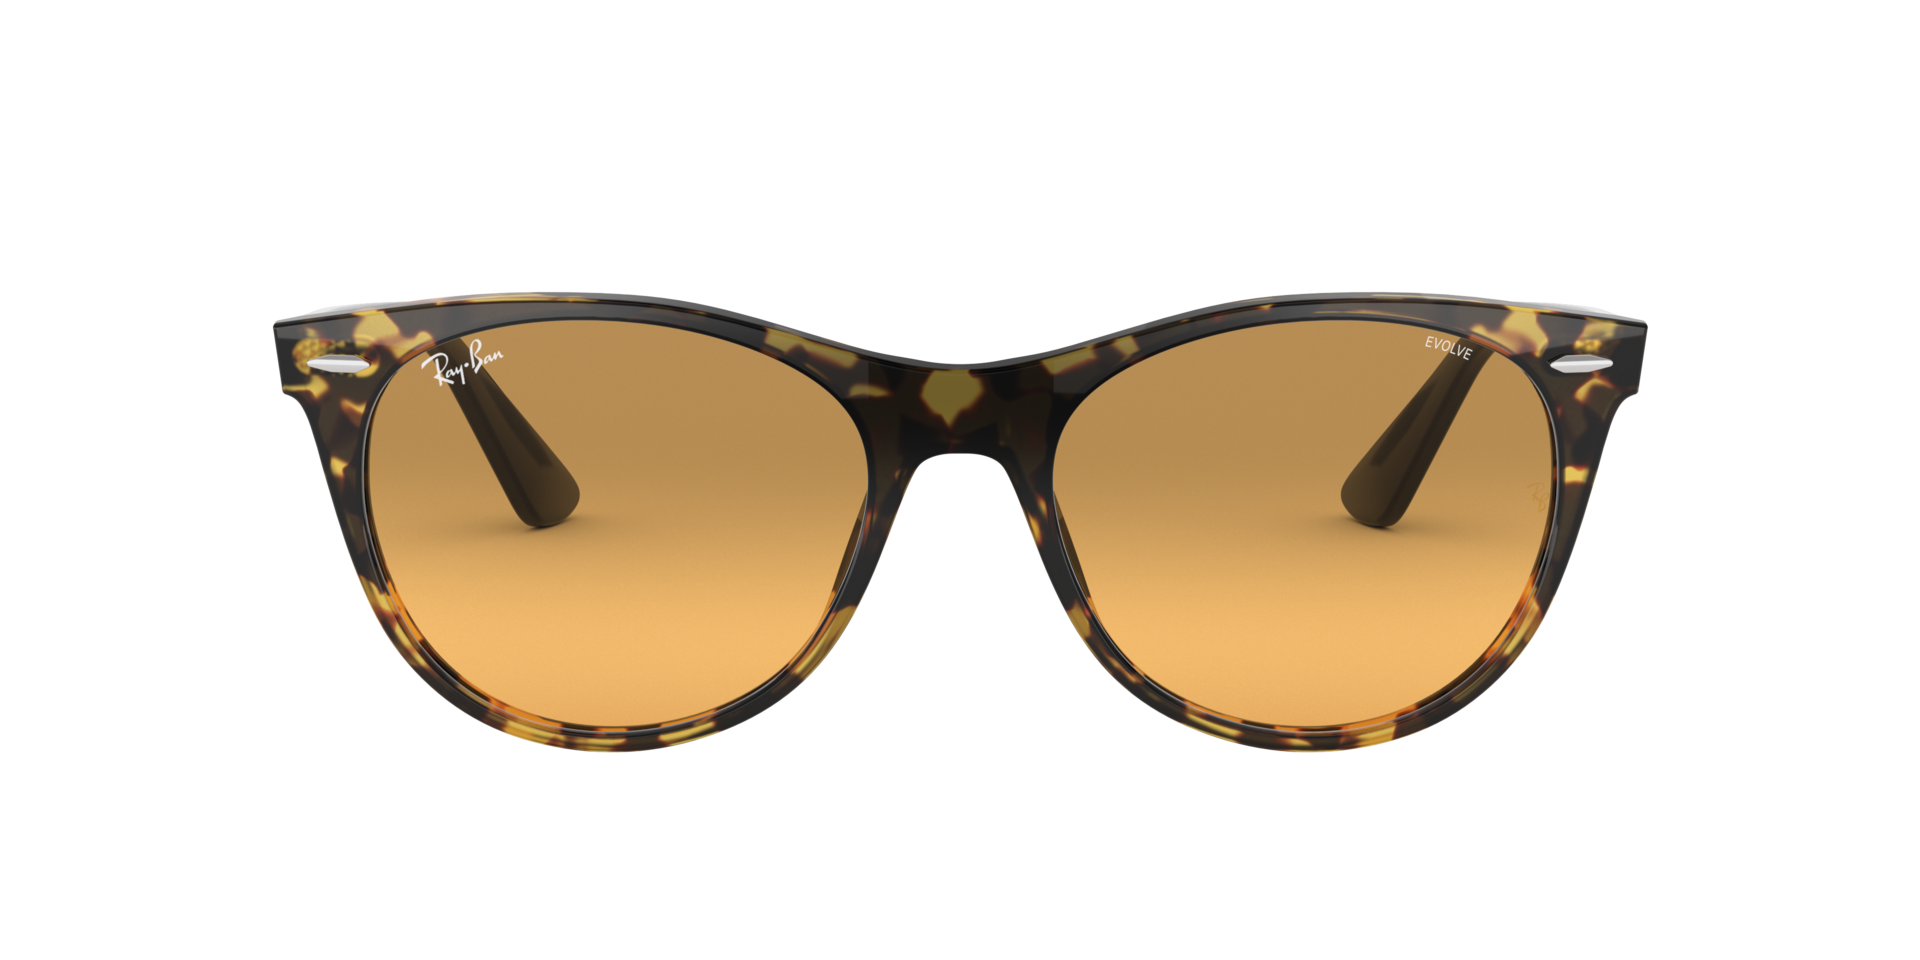 Shoppers Are Ditching Ray-Ban for These $25 Goodr Sunglasses - Men's Journal